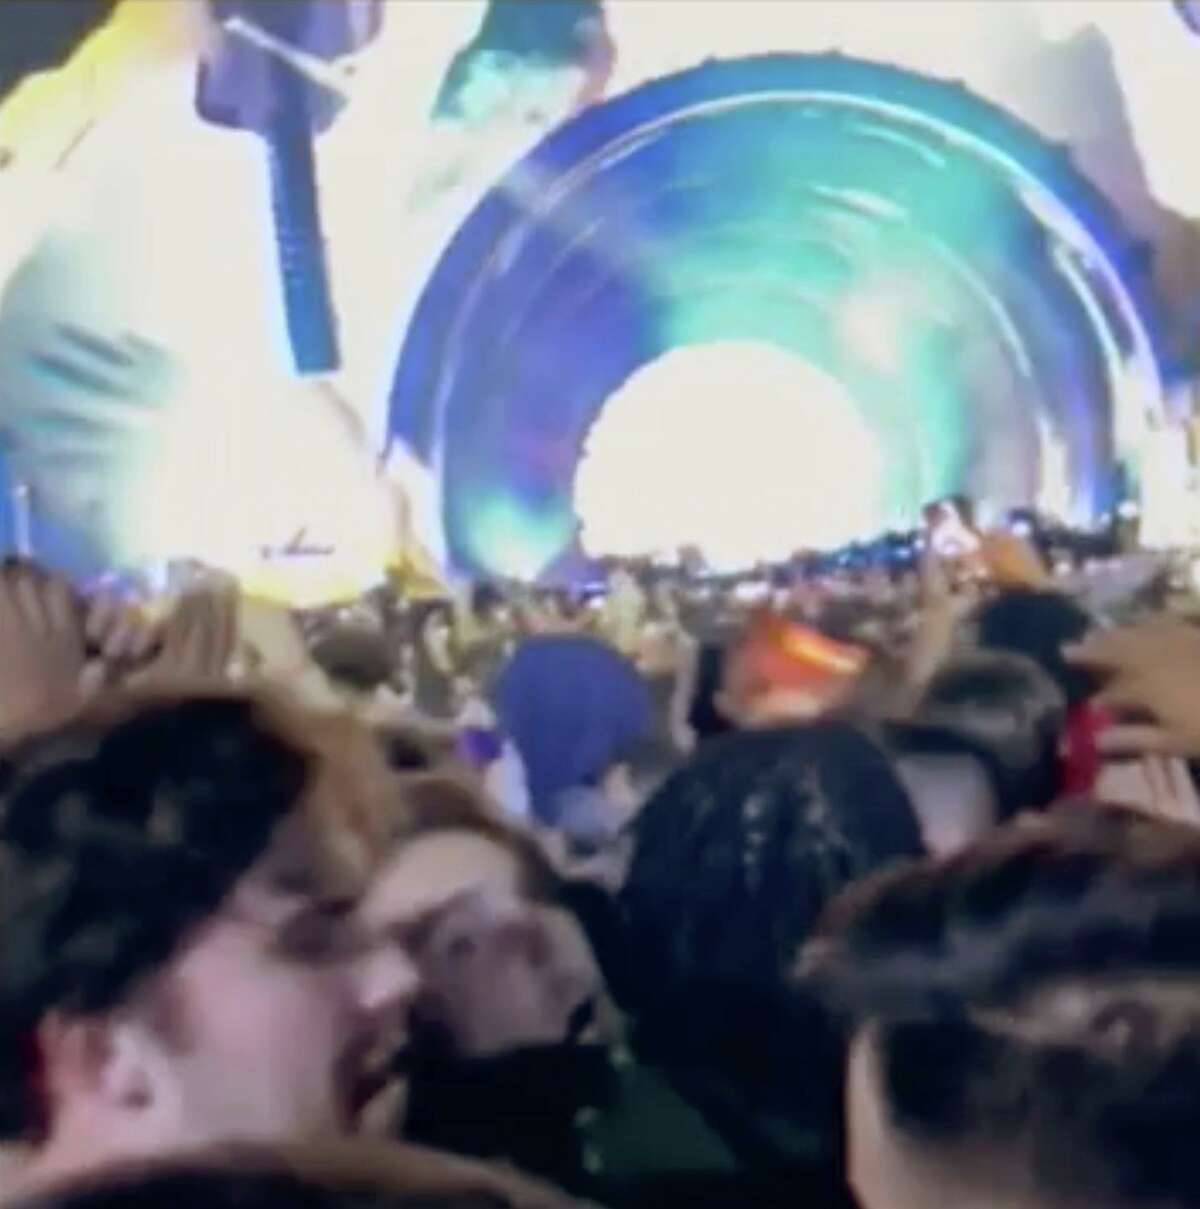 In this image from a cellphone video provided by Gabe Casey, fans attending a performance by rapper Travis Scott shout to people to “back up” during the Astroworld Festival on Nov. 5.